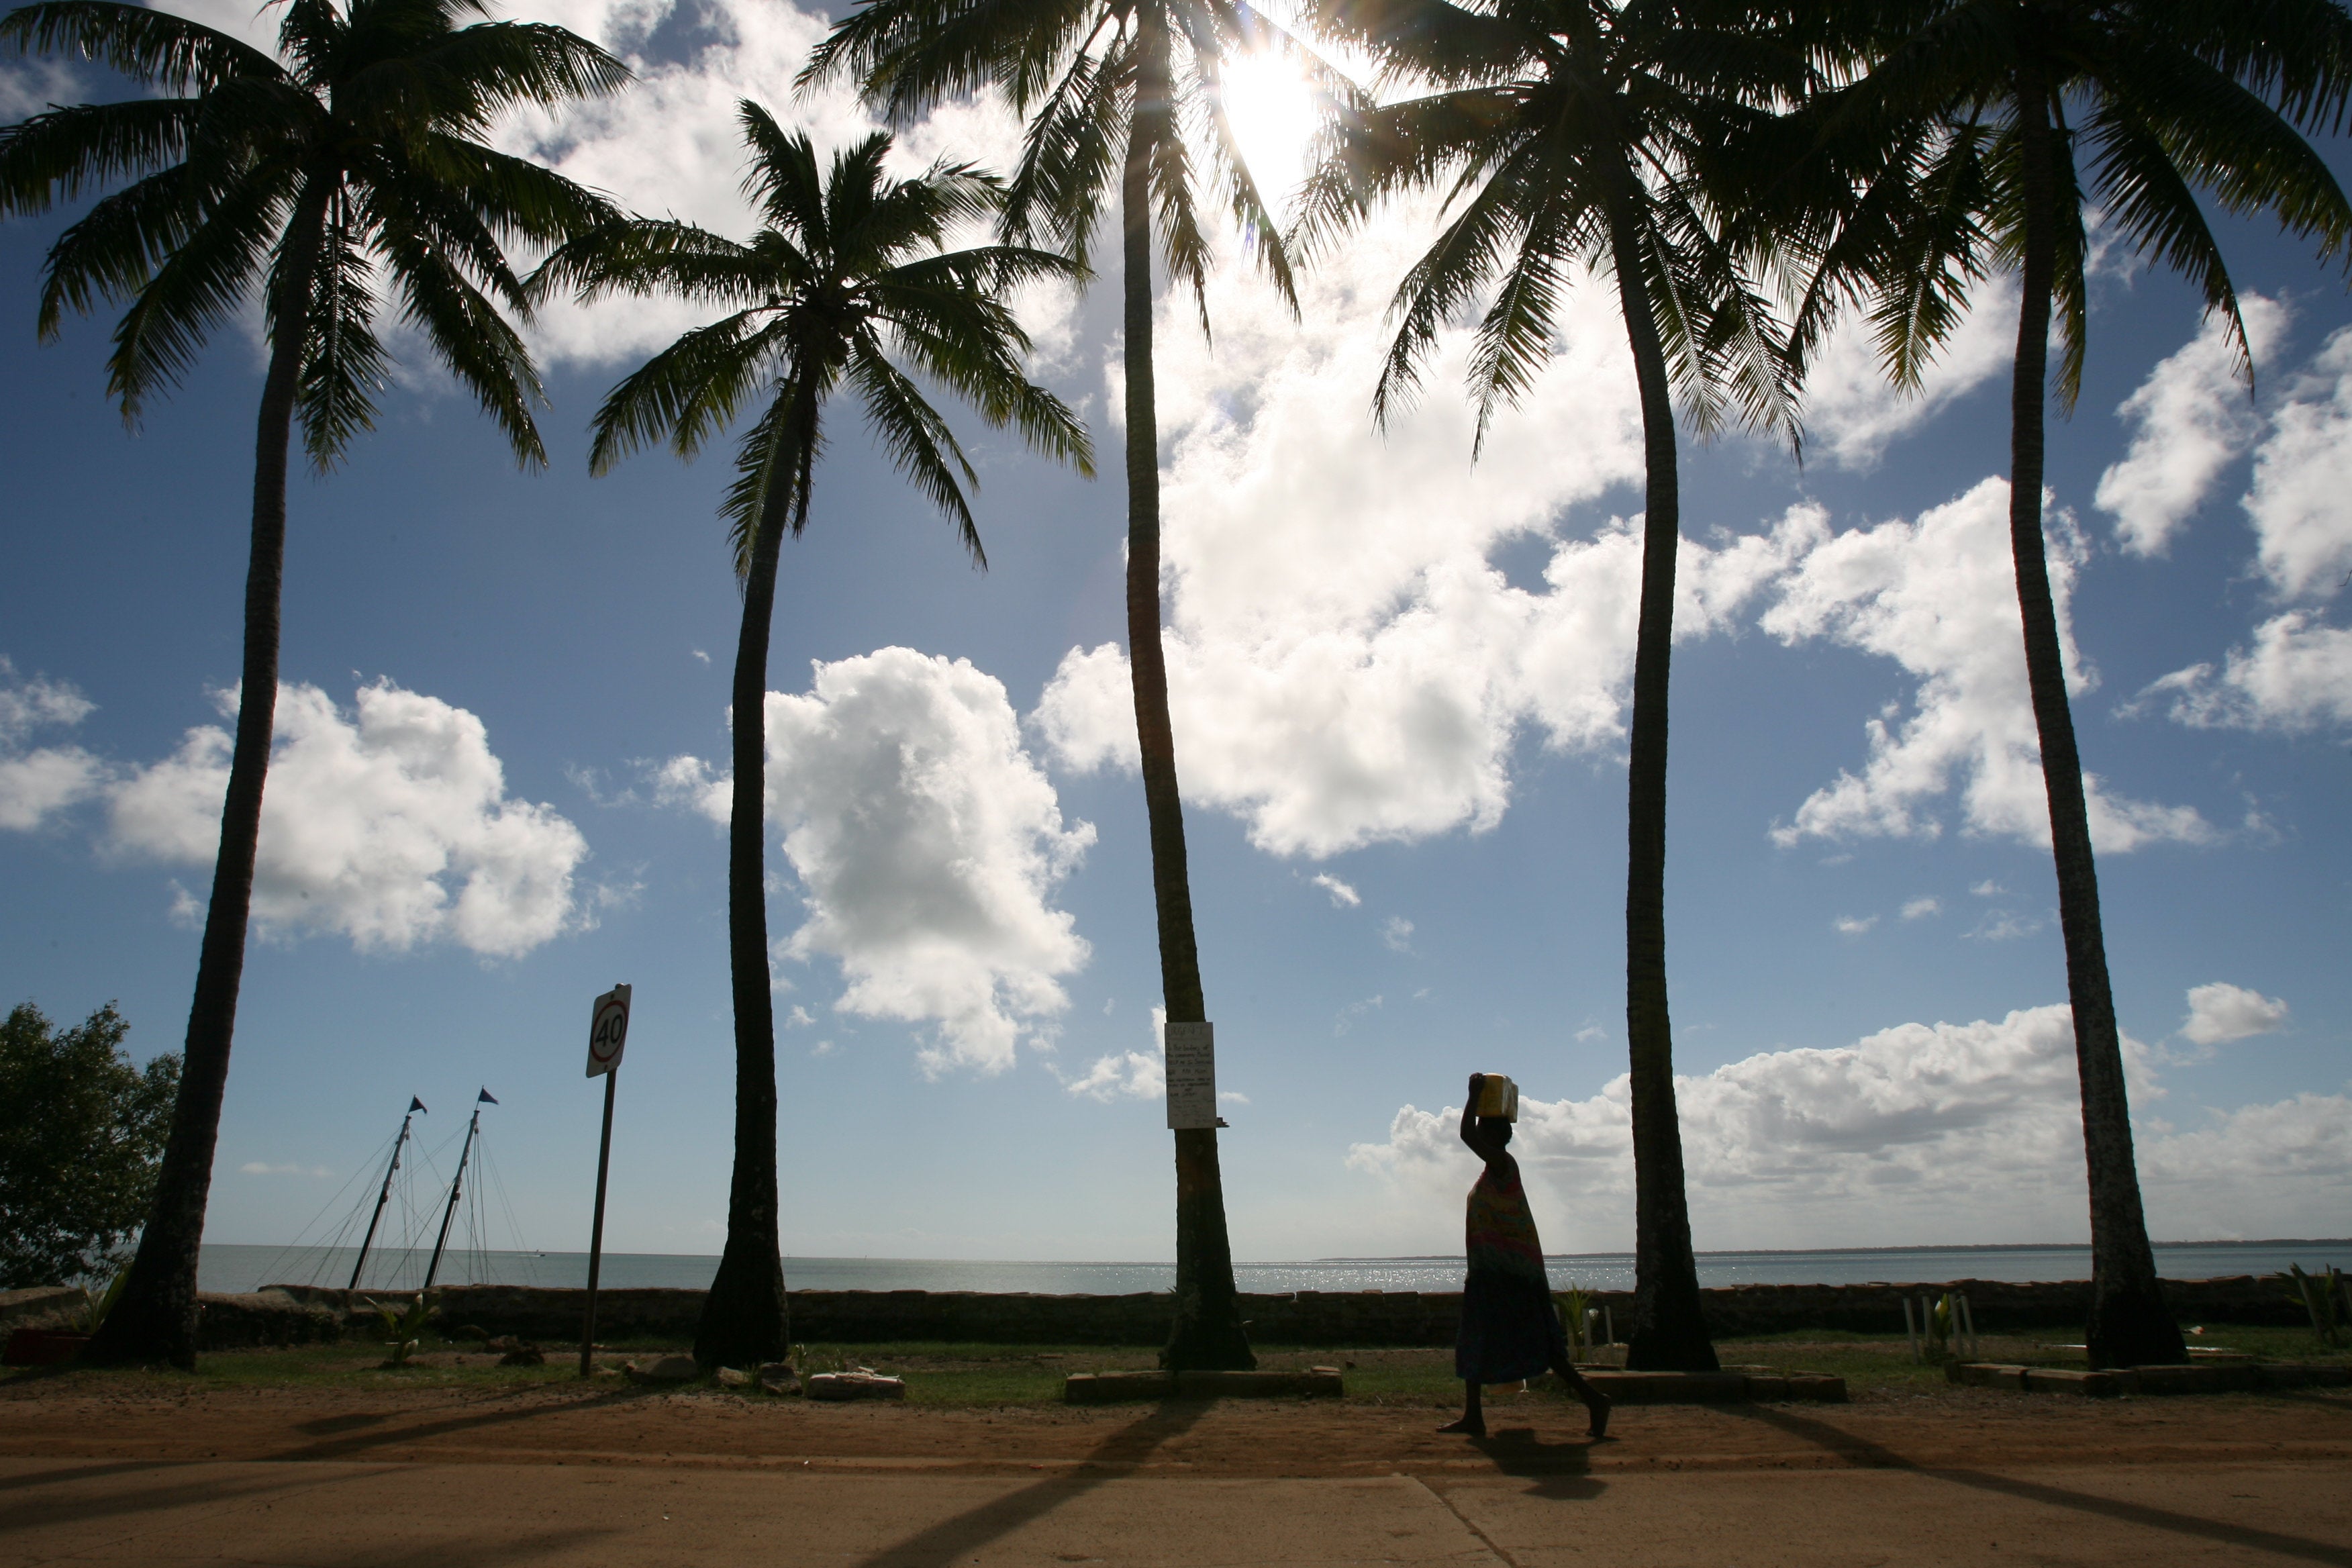 A woman walks past palm trees on Saibai Island in the Torres Strait